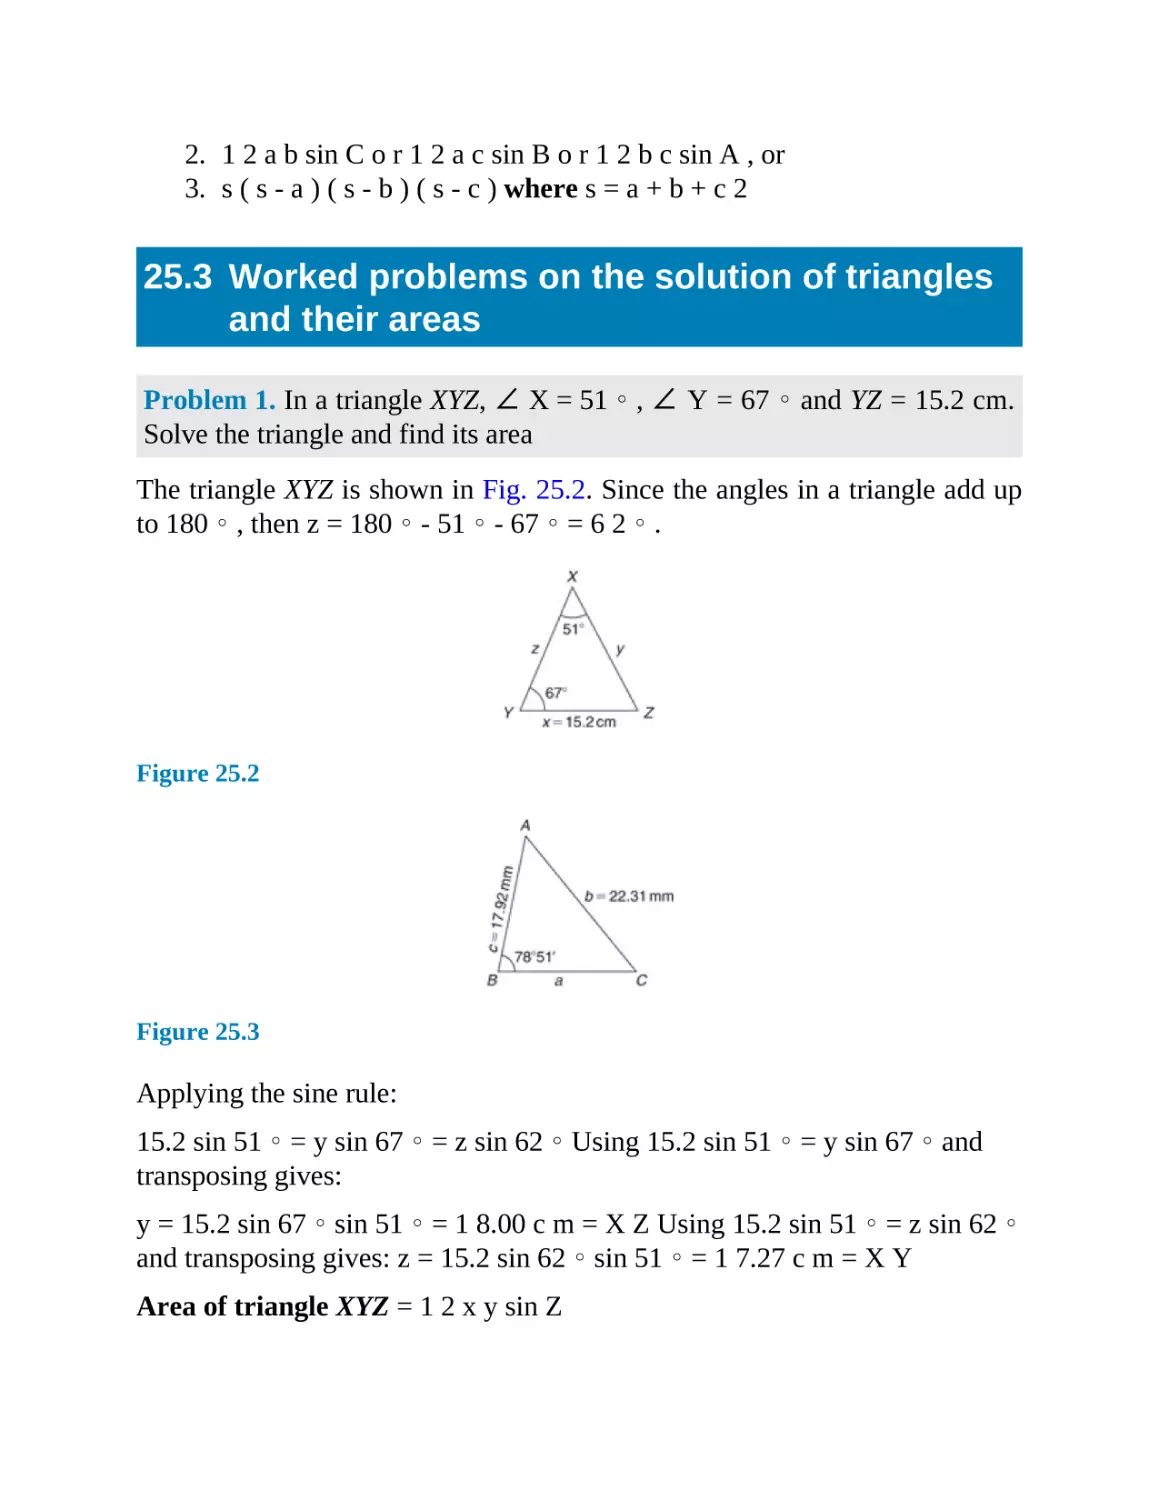 25.3 Worked problems on the solution of triangles and their areas